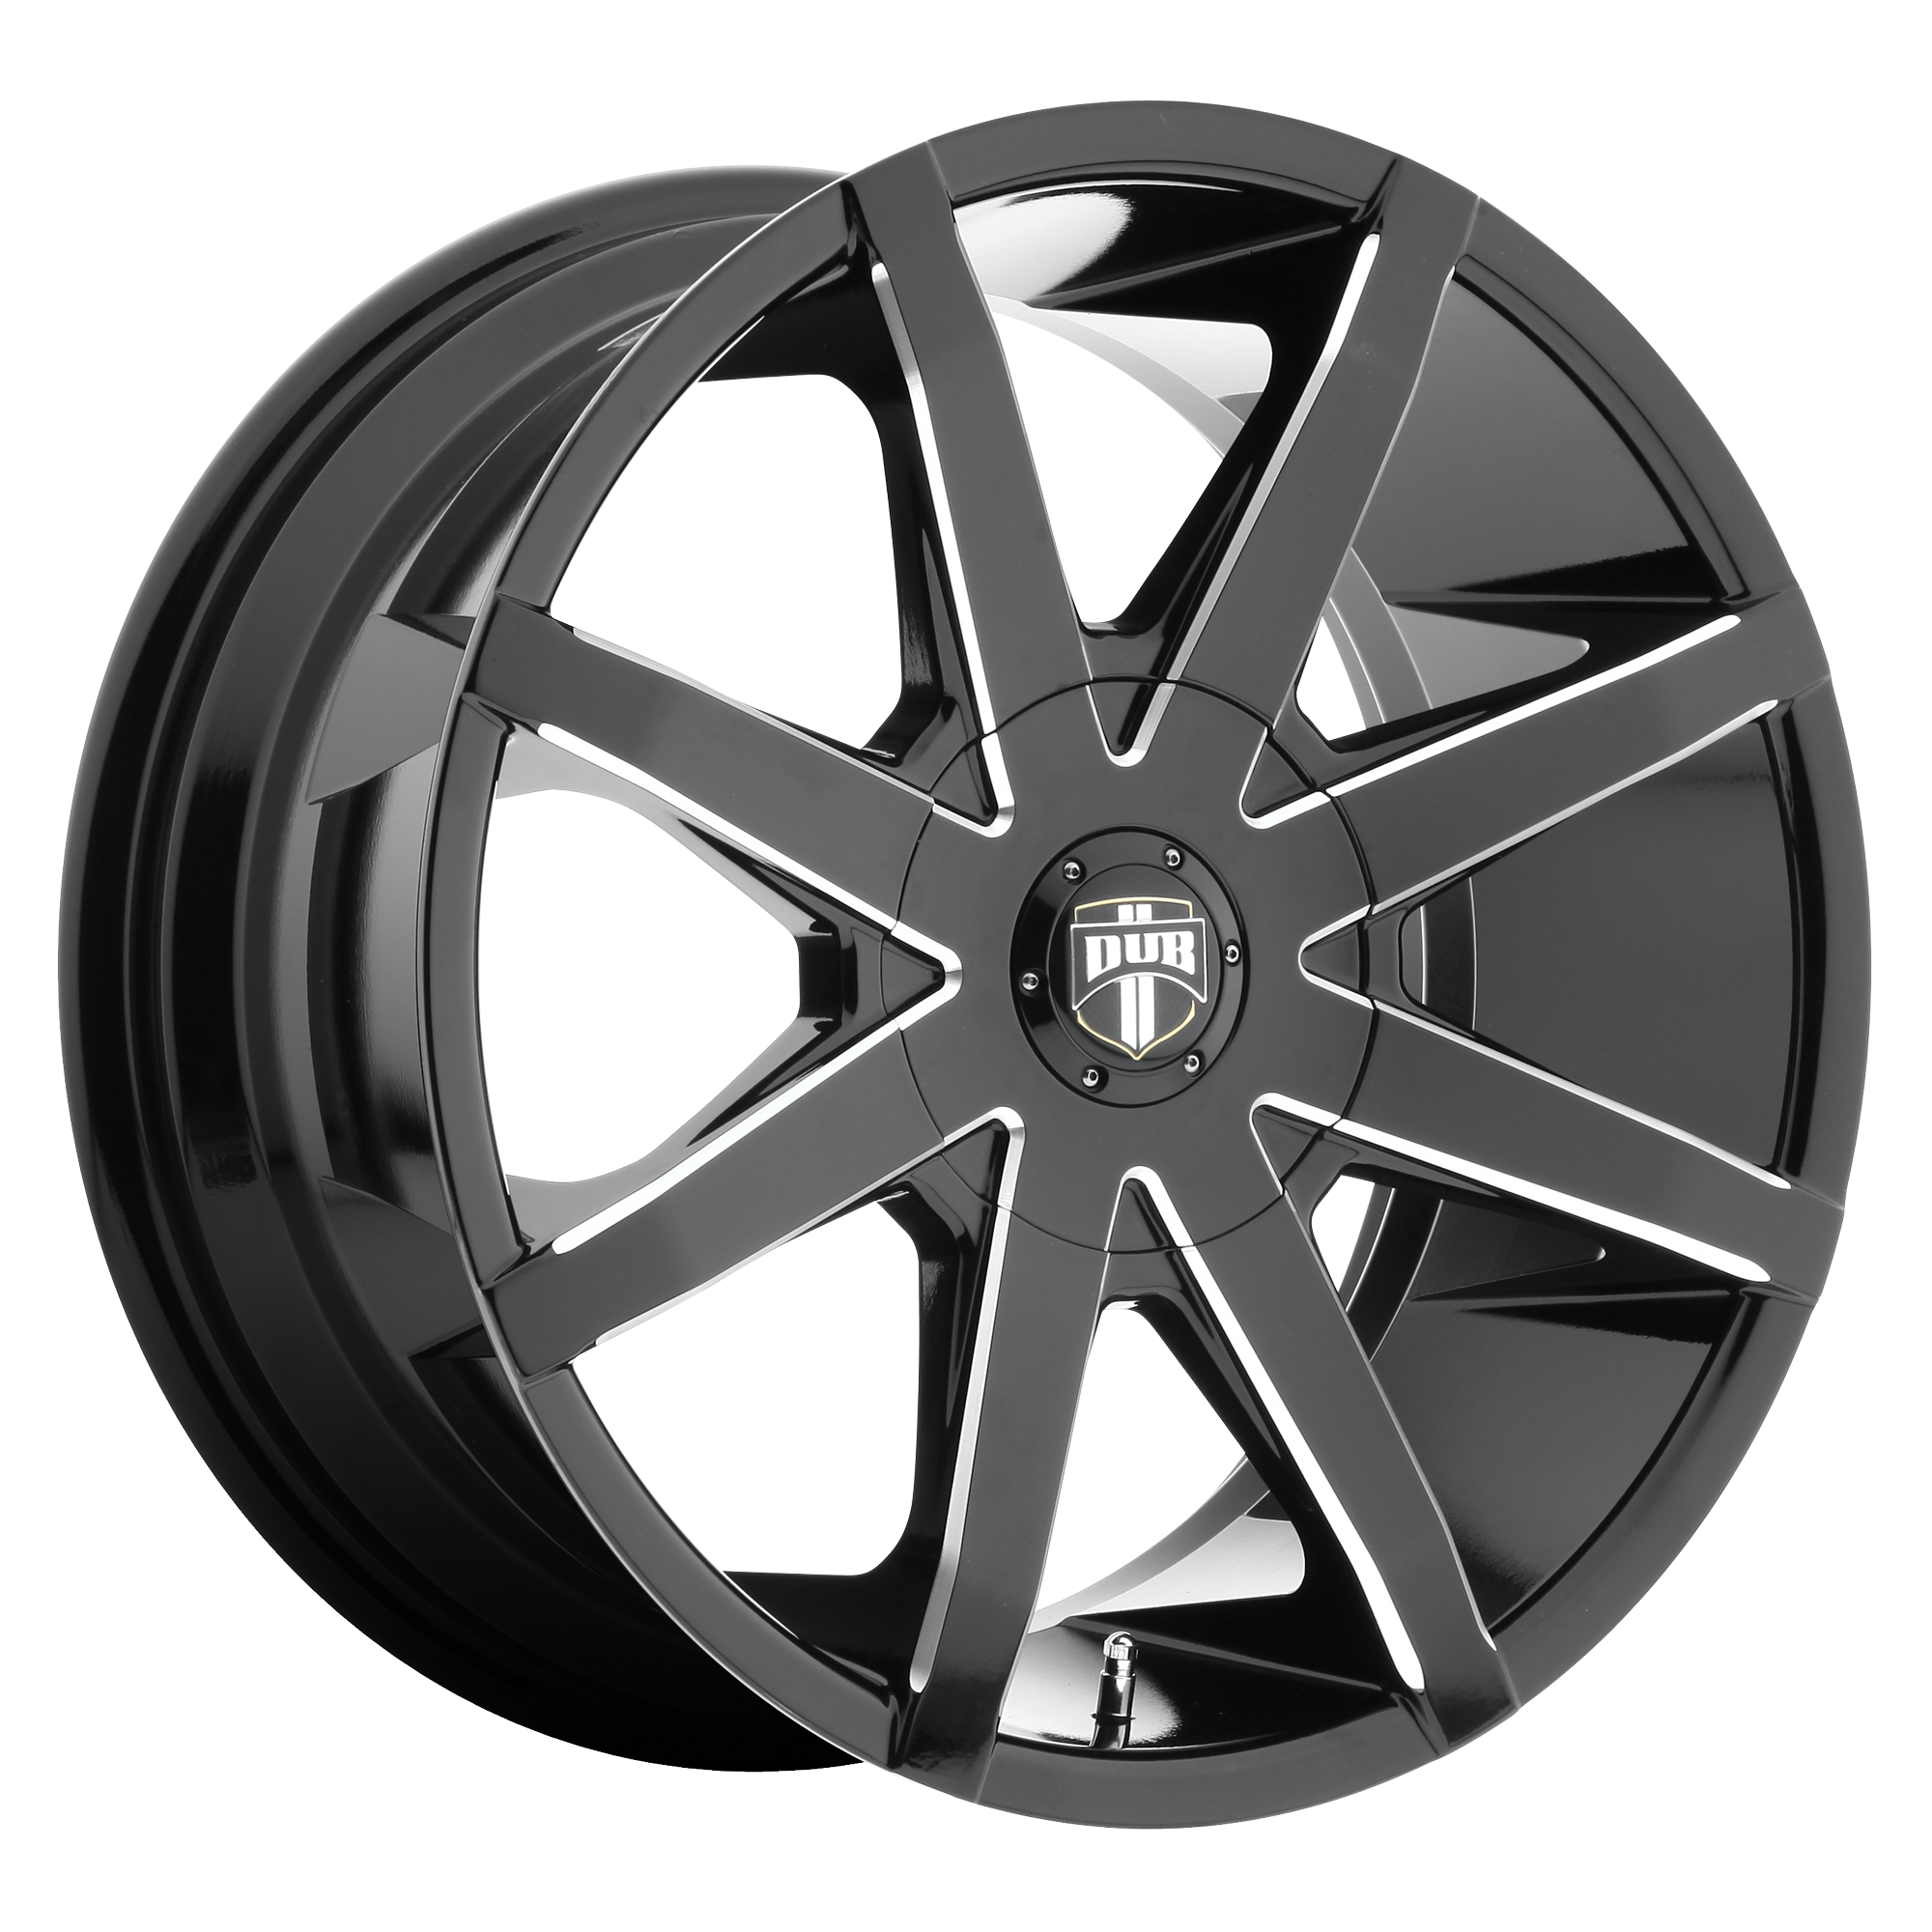 PUSH 20x8.5 5x114.30/5x127.00 GLOSS BLACK MILLED (30 mm) - Tires and Engine Performance